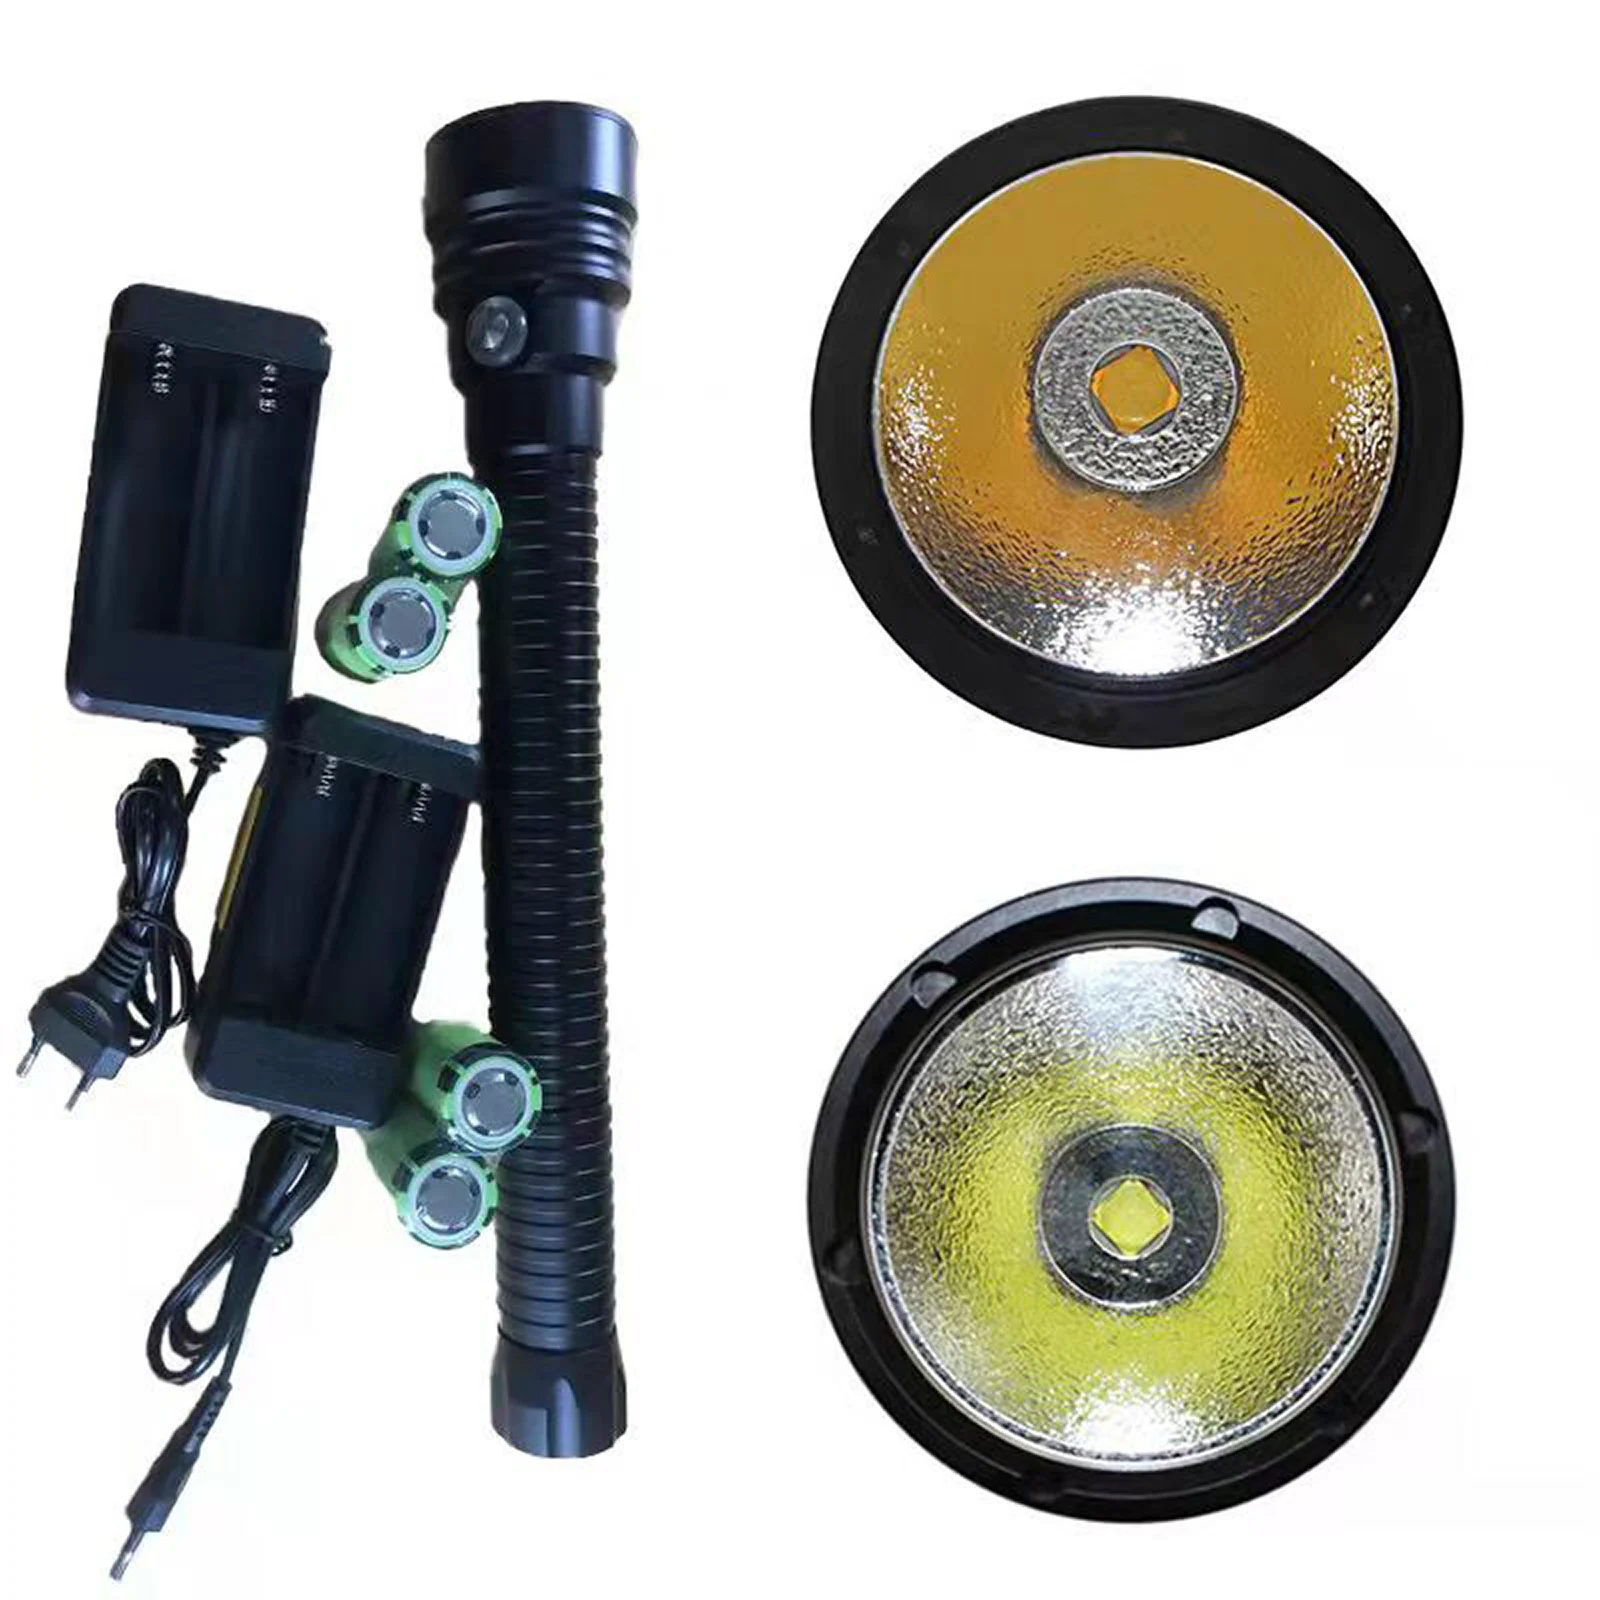 Powerful XHP70.2 led Yellow/White Light 4000 Lumens Diving Flashlight Torch 2/3/4/*26650 battery dive light led underwater xhp70 medical battery for braun 53020 0000 thermoscan pro 4000 ear welch allyn thermometer ni mh 2 40v 700mah 1 68wh blue